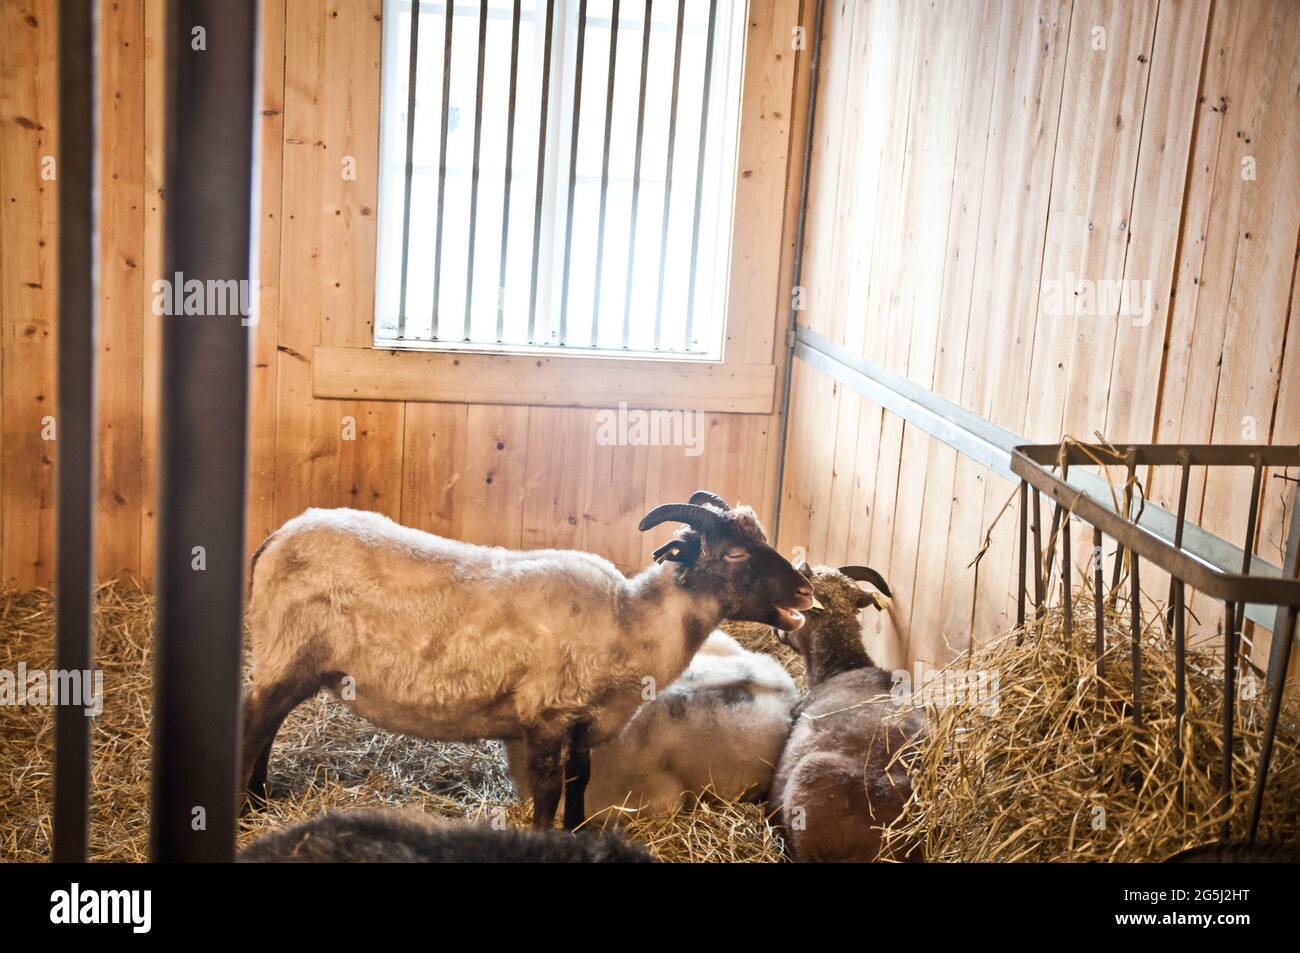 Many cute horned goats standing, resting and eating hay inside in an animal barn at a farm with window and wood walls in the rural countryside. Stock Photo